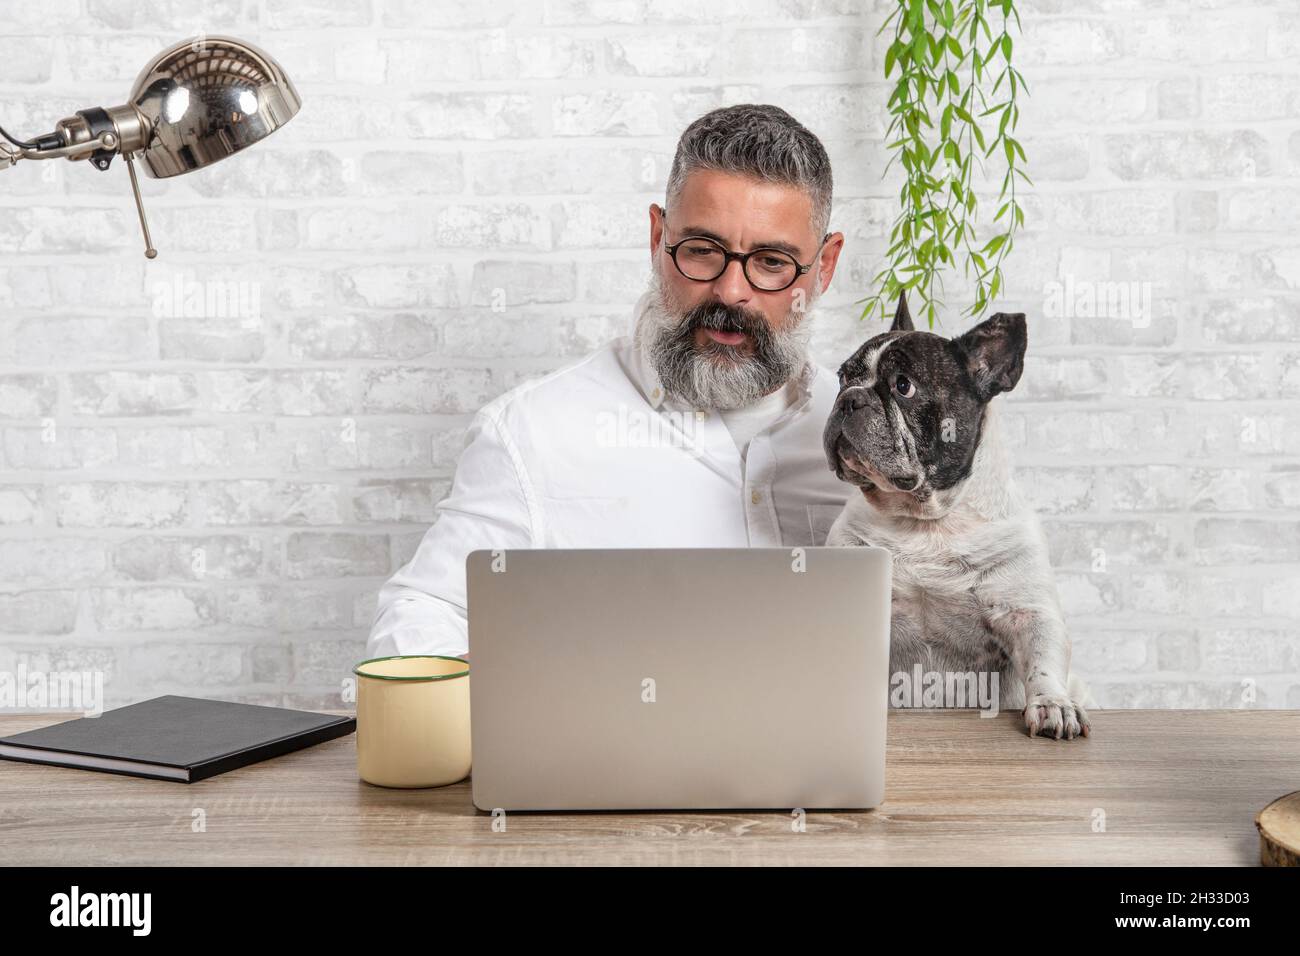 Freelance man working from home with his dog sitting together in office Stock Photo